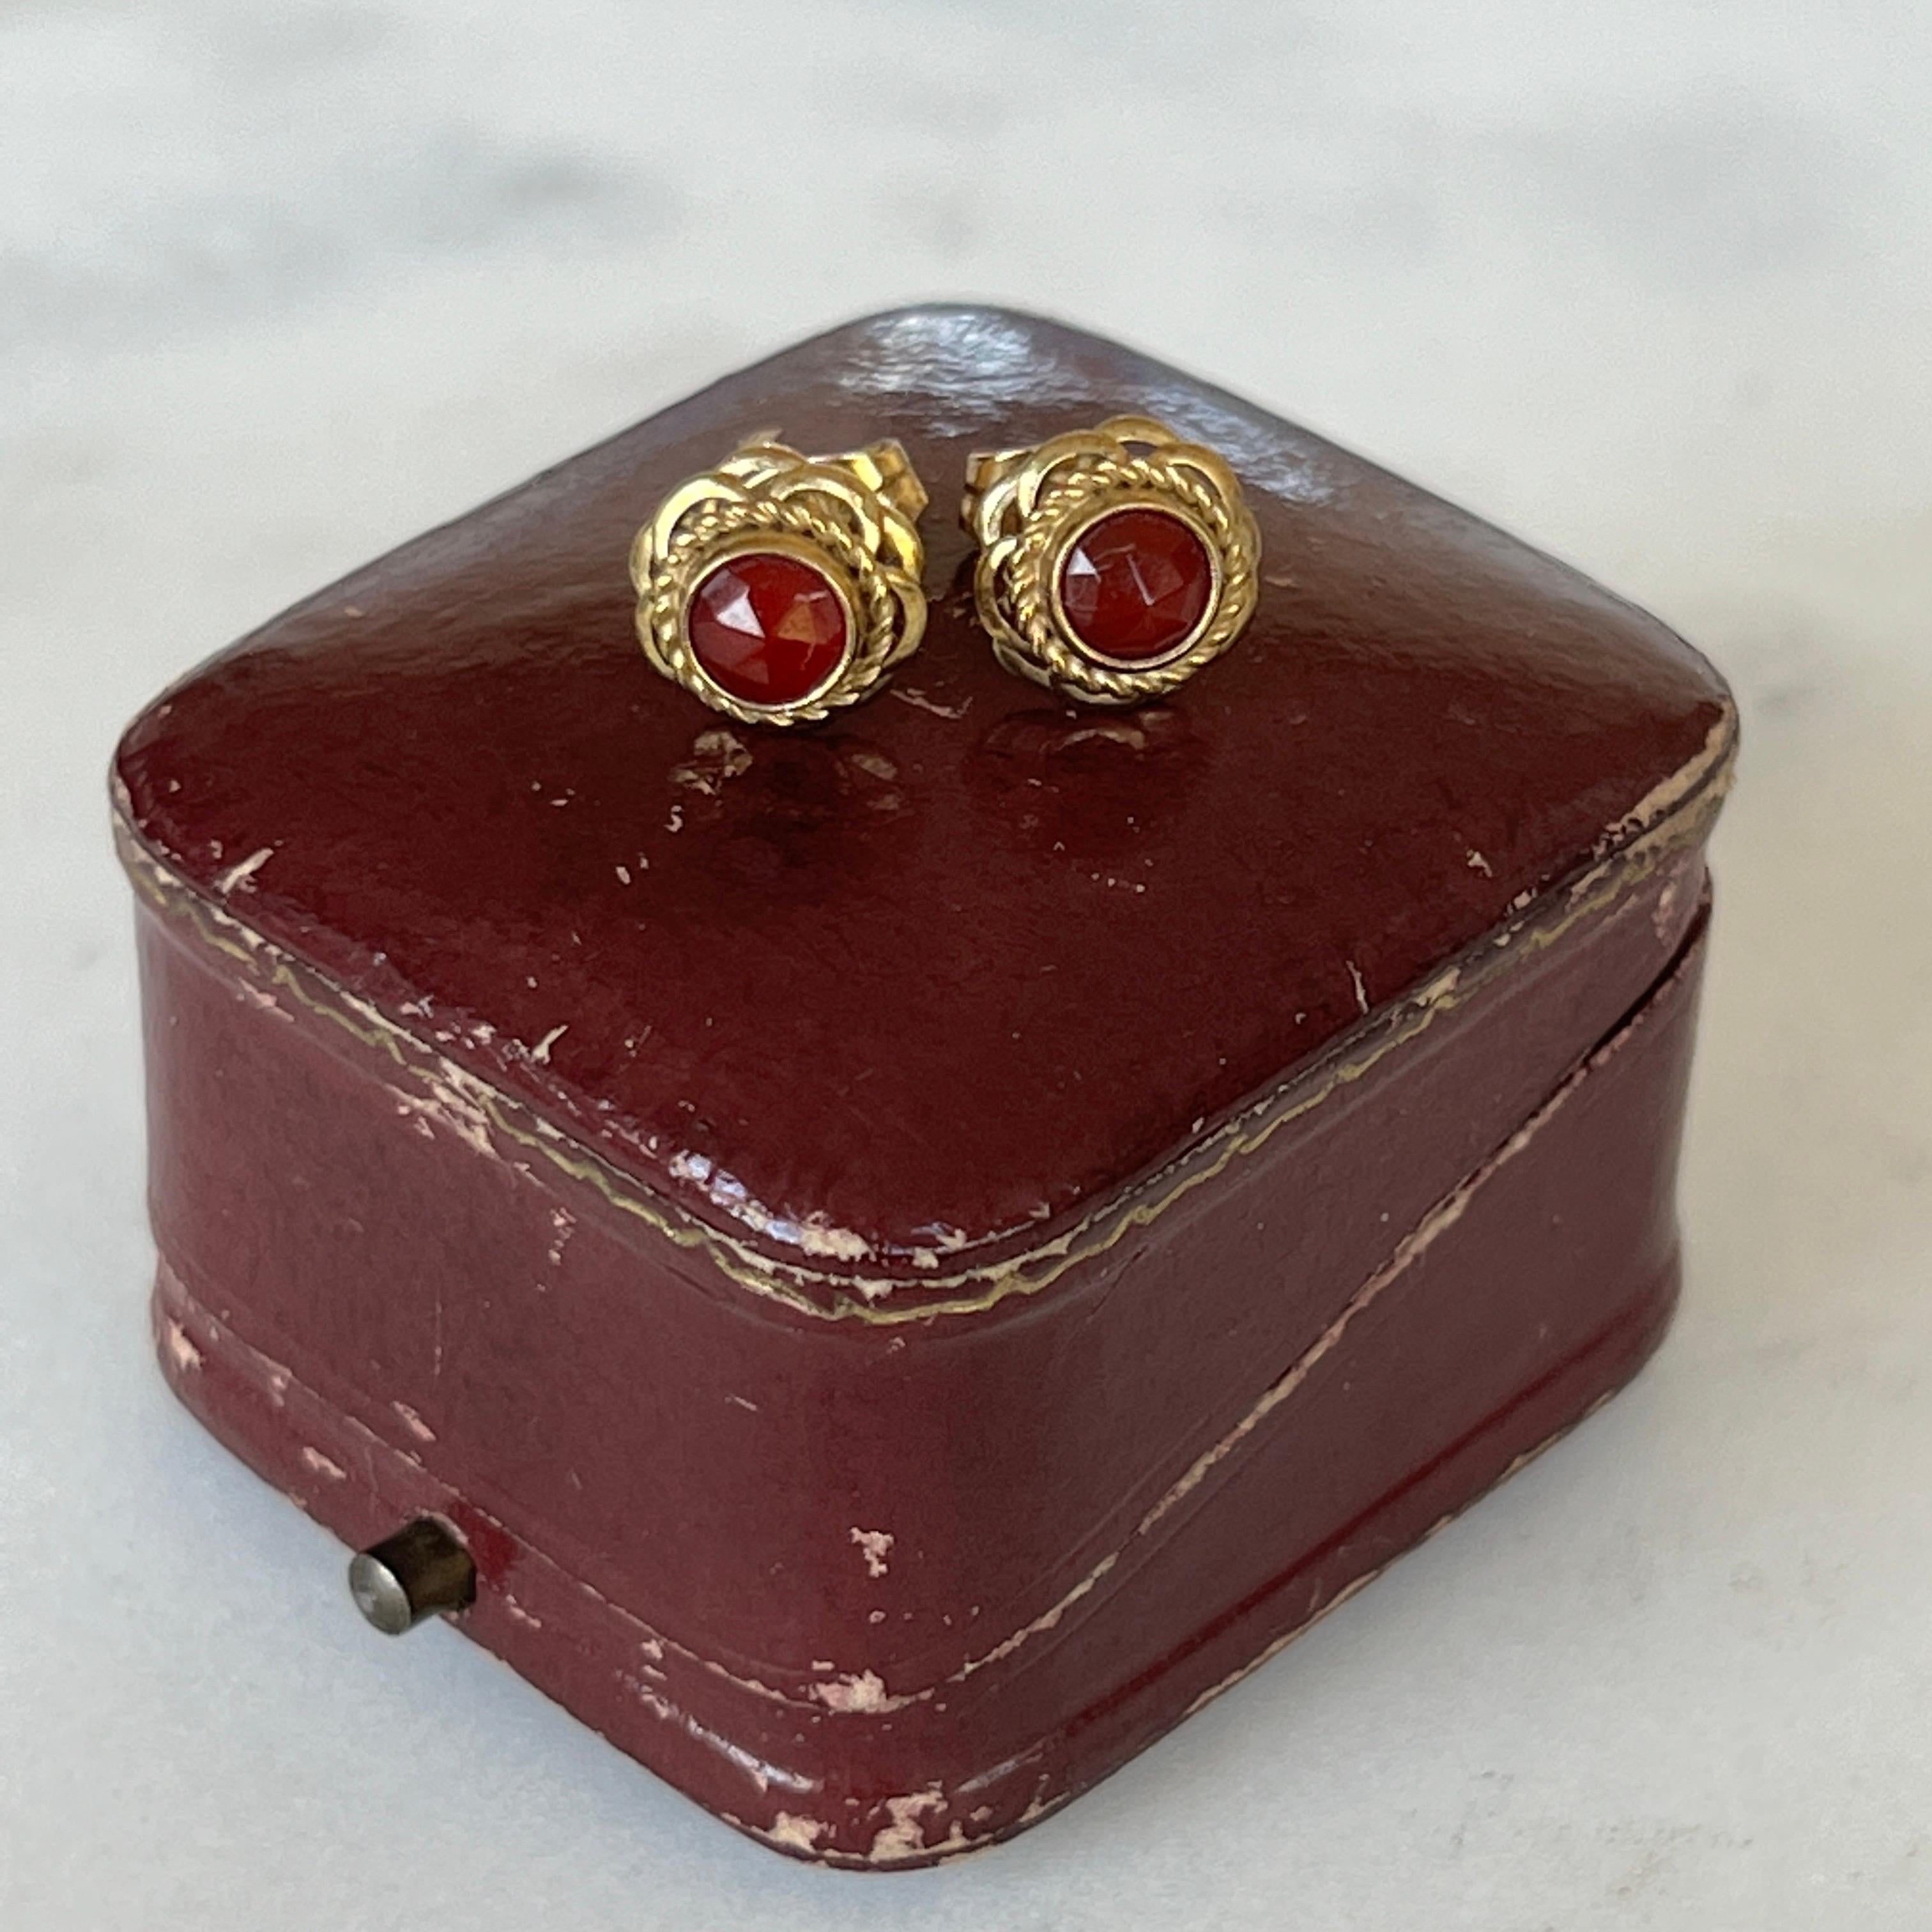 An antique pair of elegant natural carnelian stud earrings from Late 19th Century. The faceted carnelian is set in a lovely embellished 14 karat gold mounting. The beautiful stone is surrounded by a fine gold rope motif and the edge is made with a